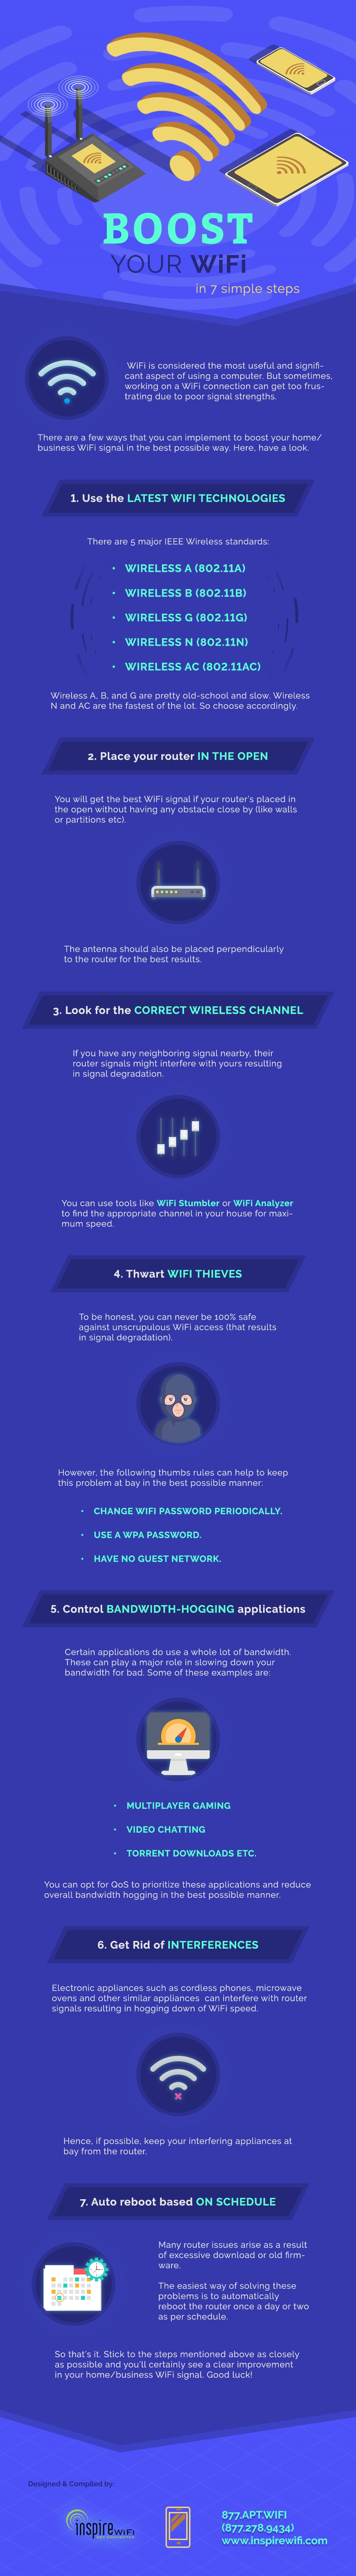 Why Does Your WiFi Speed Stink? [Infographic] | DeviceDaily.com